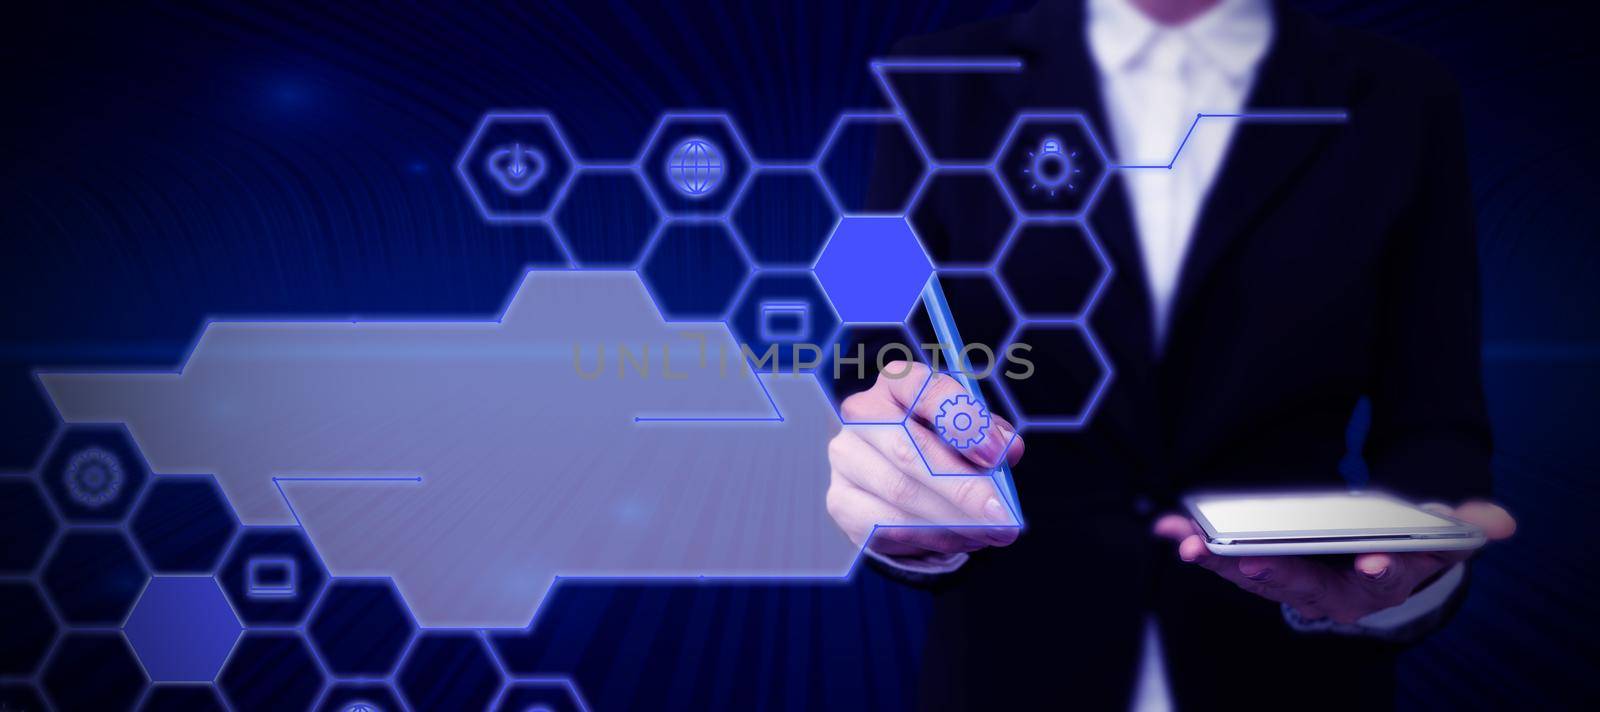 Businessman in suit holding open palm symbolizing successful teamwork.